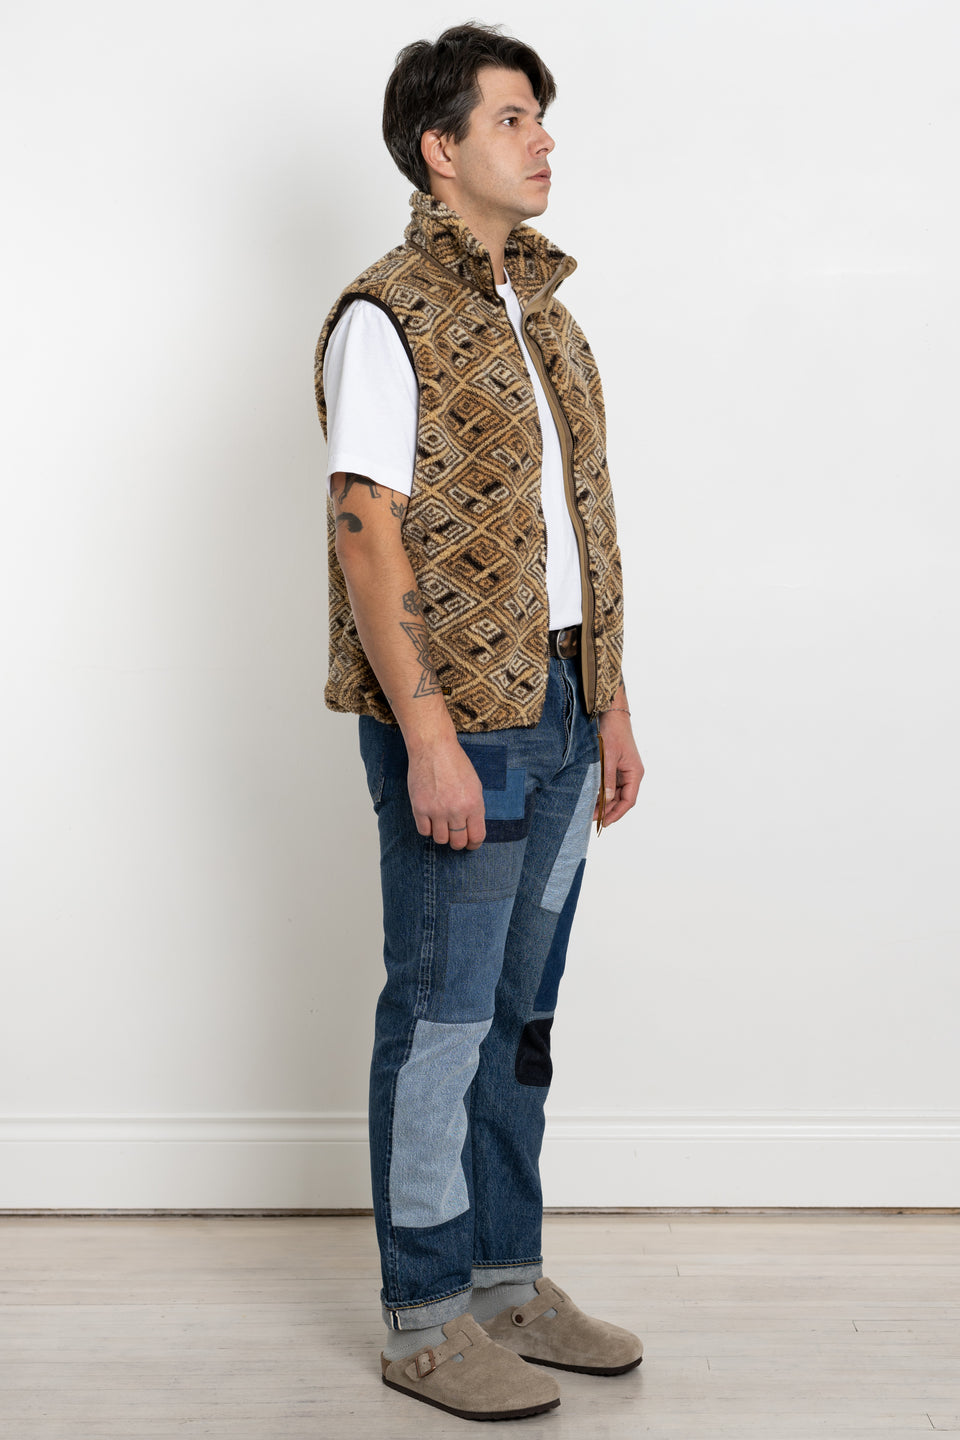 orSlow Japan 23AW FW23 Men's Collection African Pattern Boa Fleece Vest Calculus Victoria BC Canada